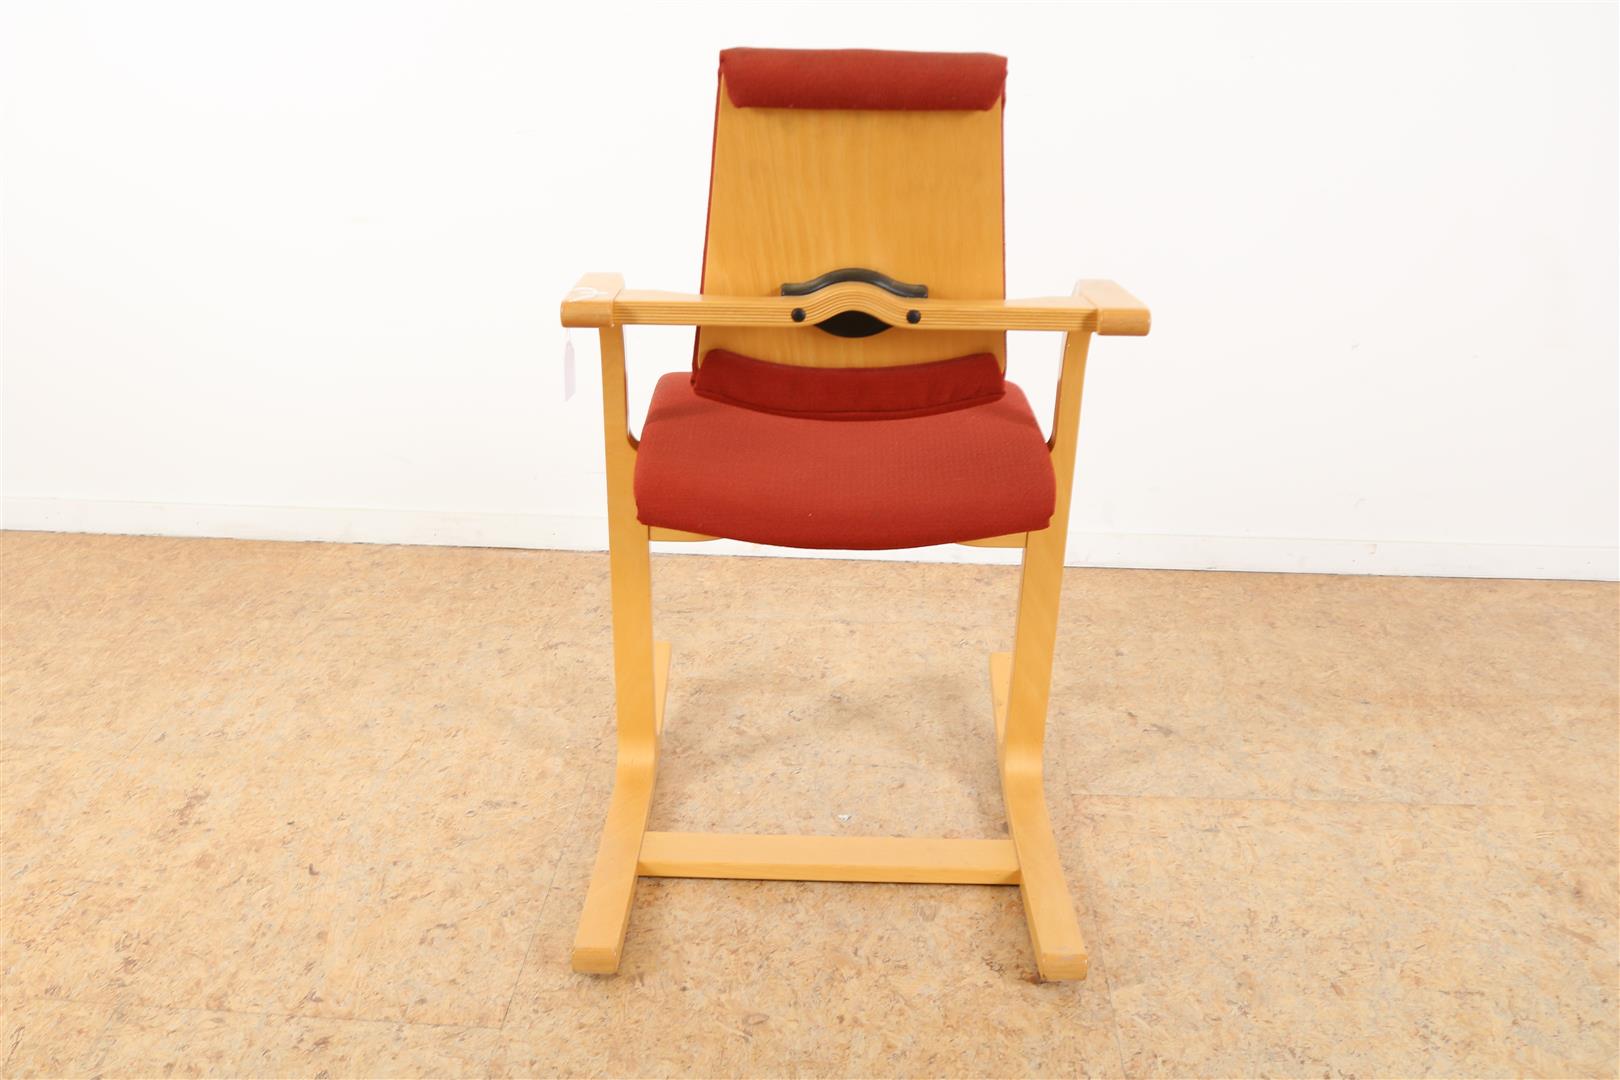 Beech wood balance chair with red upholstery, Peter Opsvik for Stokke Varier, model Aculum, Norway. - Image 3 of 5